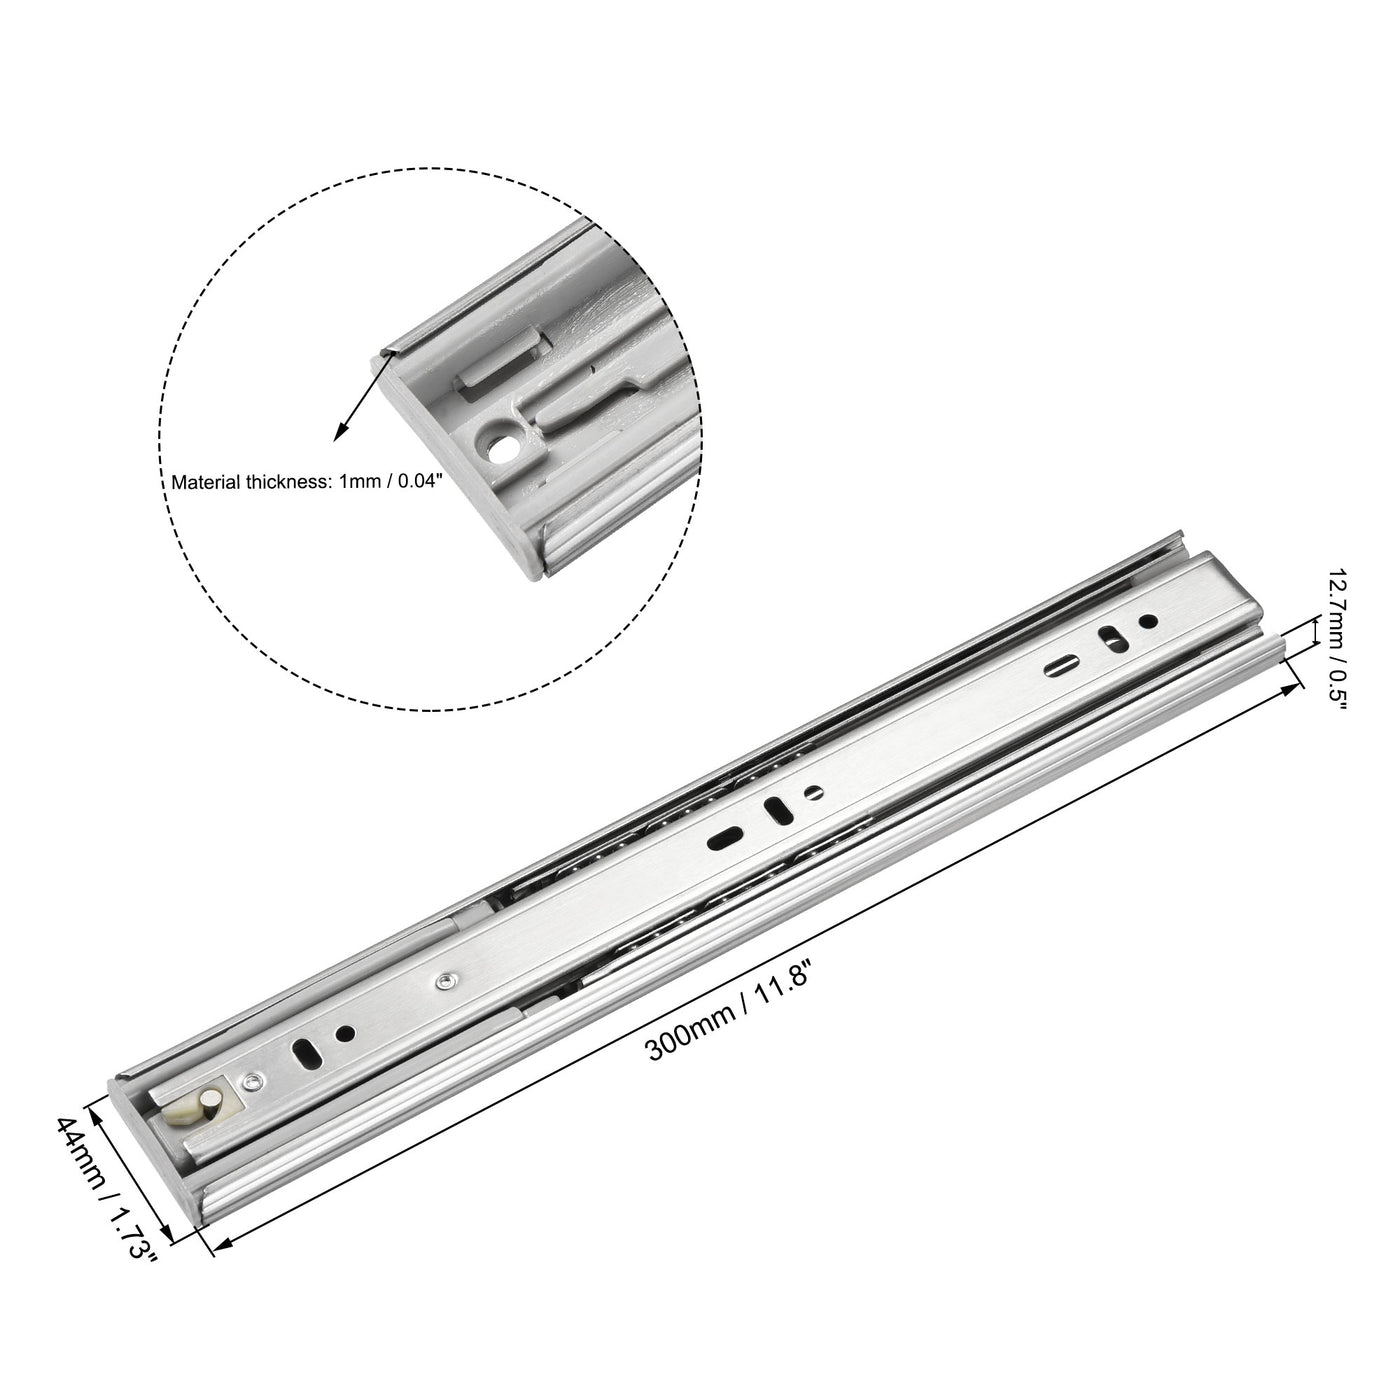 uxcell Uxcell 11.8Inch Drawer Slides Soft-Close Ball Bearing Slide Track Rail with Spring Damping 44mm Wide 3 Sections 100lb Capacity , 1 Pair